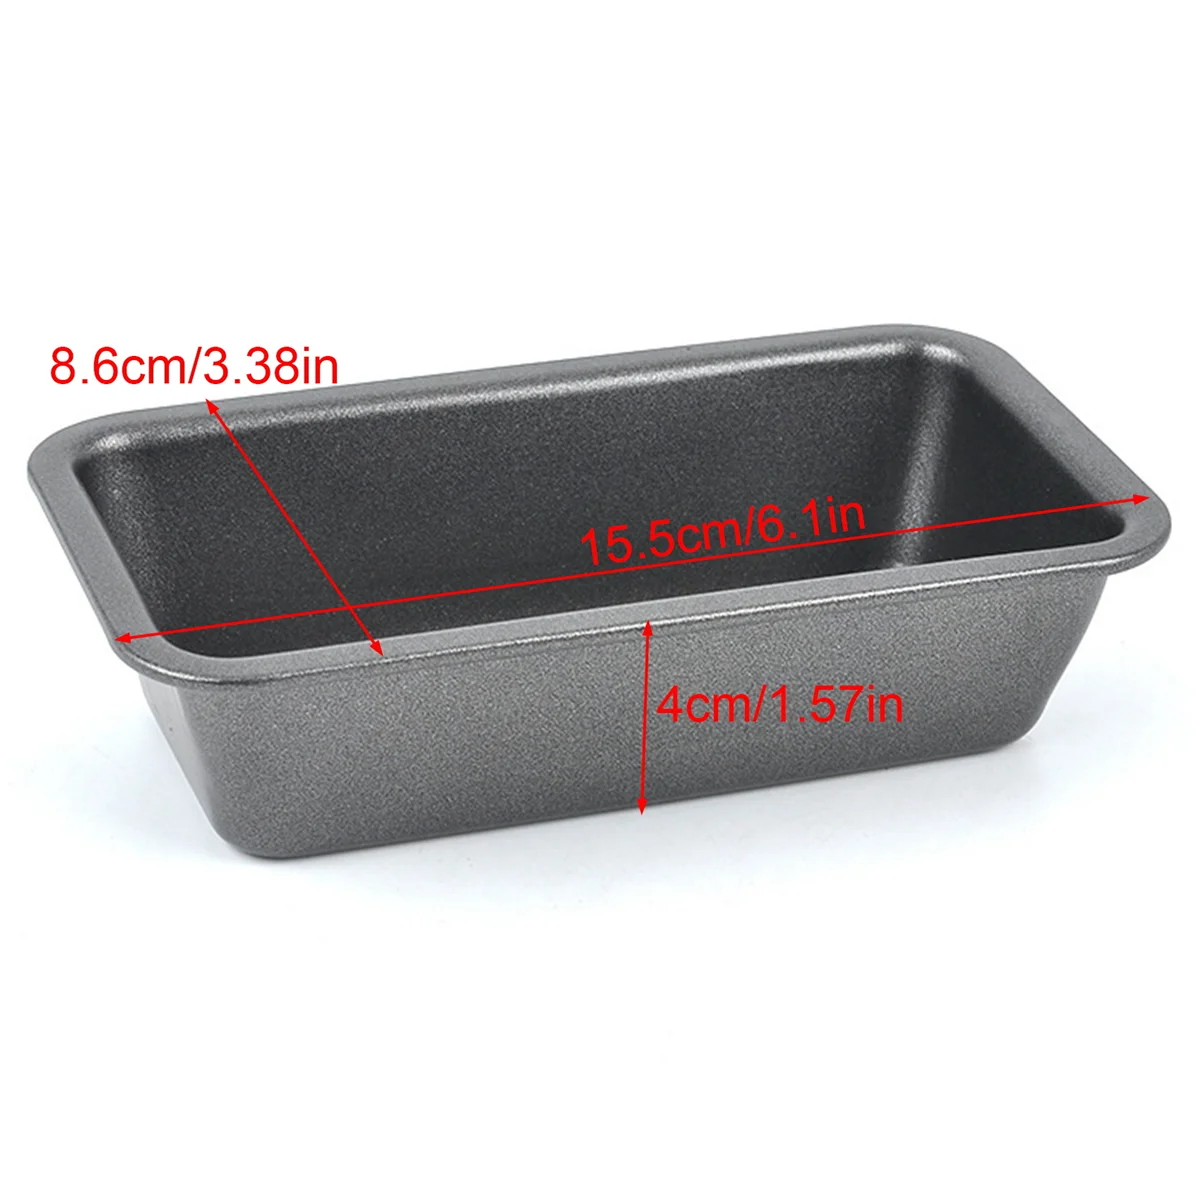 https://ae01.alicdn.com/kf/S3db2e22a1ecf461ab54aab90b0d0fcb3r/2Pcs-Bread-Pans-for-Baking-Nonstick-Carbon-Steel-Loaf-Pan-Tray-Toast-Mold-Cake-Loaf-Pastry.jpg